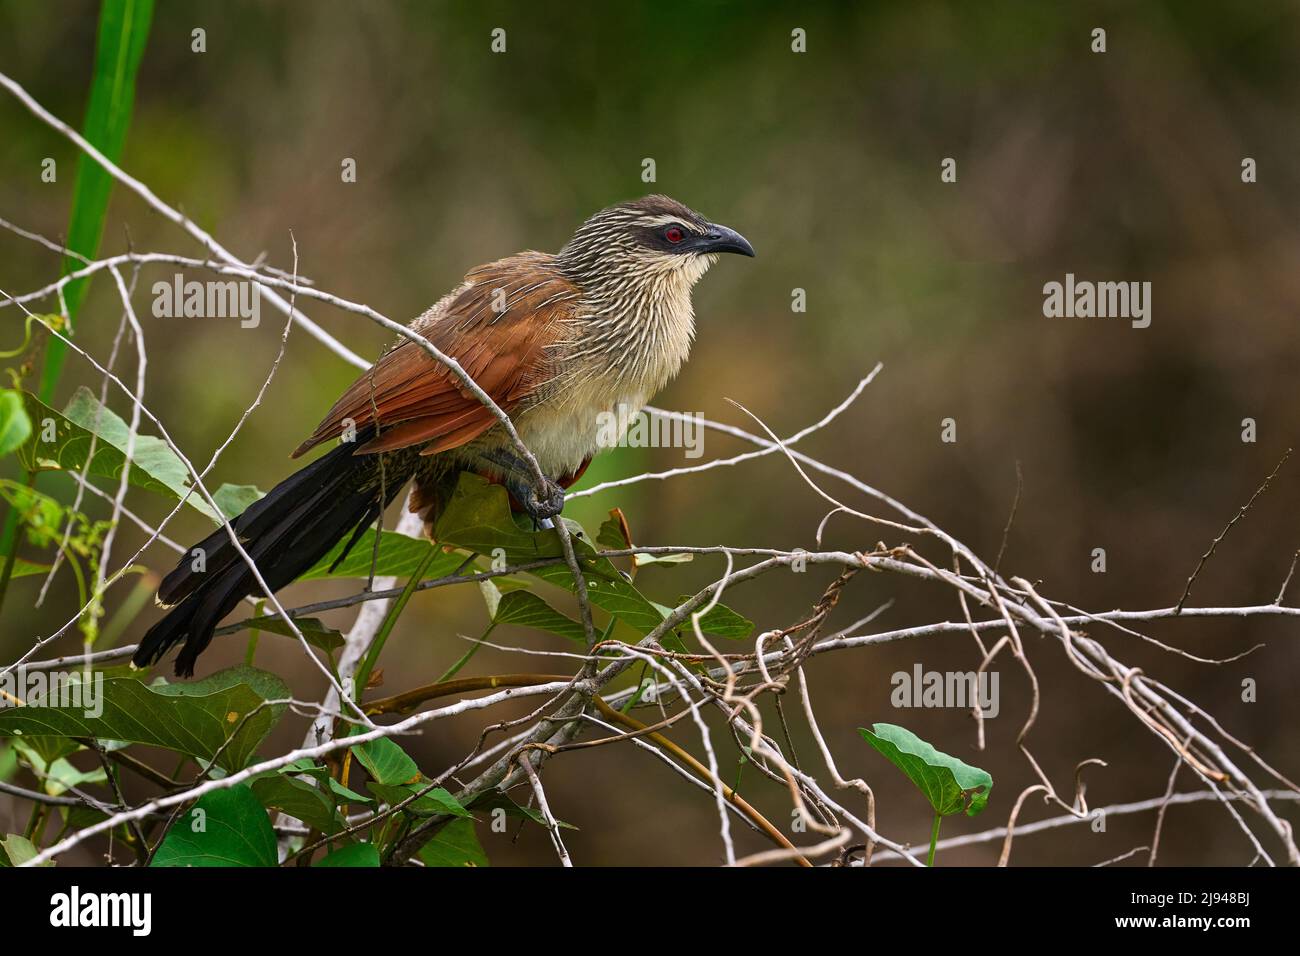 White-browed coucal or lark-heeled cuckoo, bird in family Cuculidae, sitting in branch in wild nature. Big bird coucal in habitat, Cyperus papyrus, Vi Stock Photo